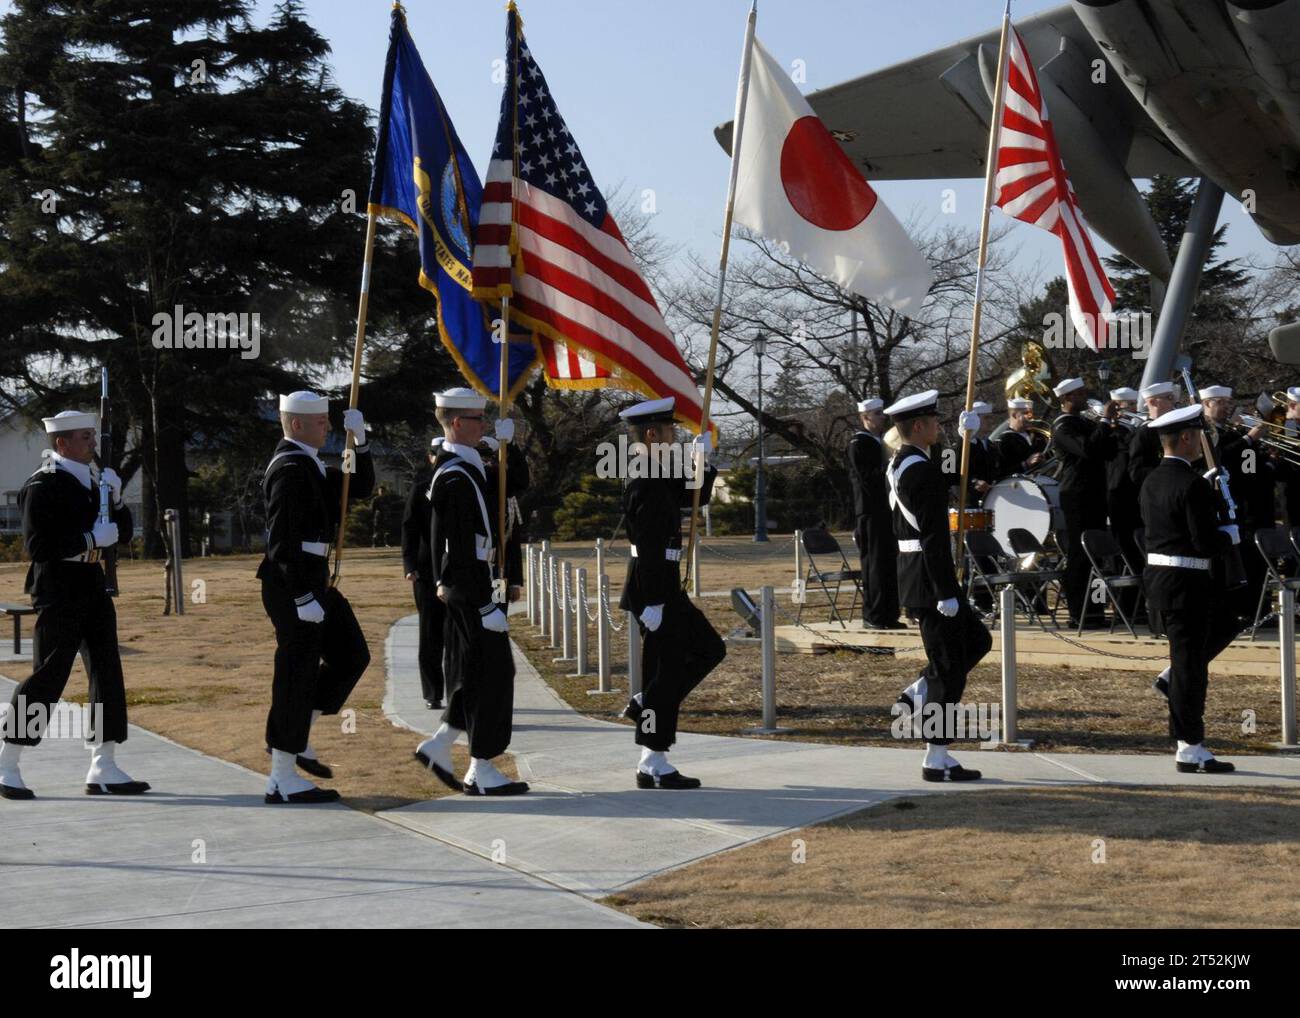 1001195019M-002  ATSUGI, Japan (Jan. 19, 2010) The U.S. Navy and Japan Maritime Self-Defense Force joint honor guard parades the colors at a dedication ceremony for Alliance Park at Naval Air Facility Atsugi. The park dedication celebrated the 50th anniversary of the signing of the Treaty of Mutual Cooperation and Security between the U.S. and Japan. Signed and ratified in 1960, the treaty serves as a foundation for the strong alliance and interoperability between the U.S. Navy and the Japan Maritime Self-Defense Force. Navy Stock Photo